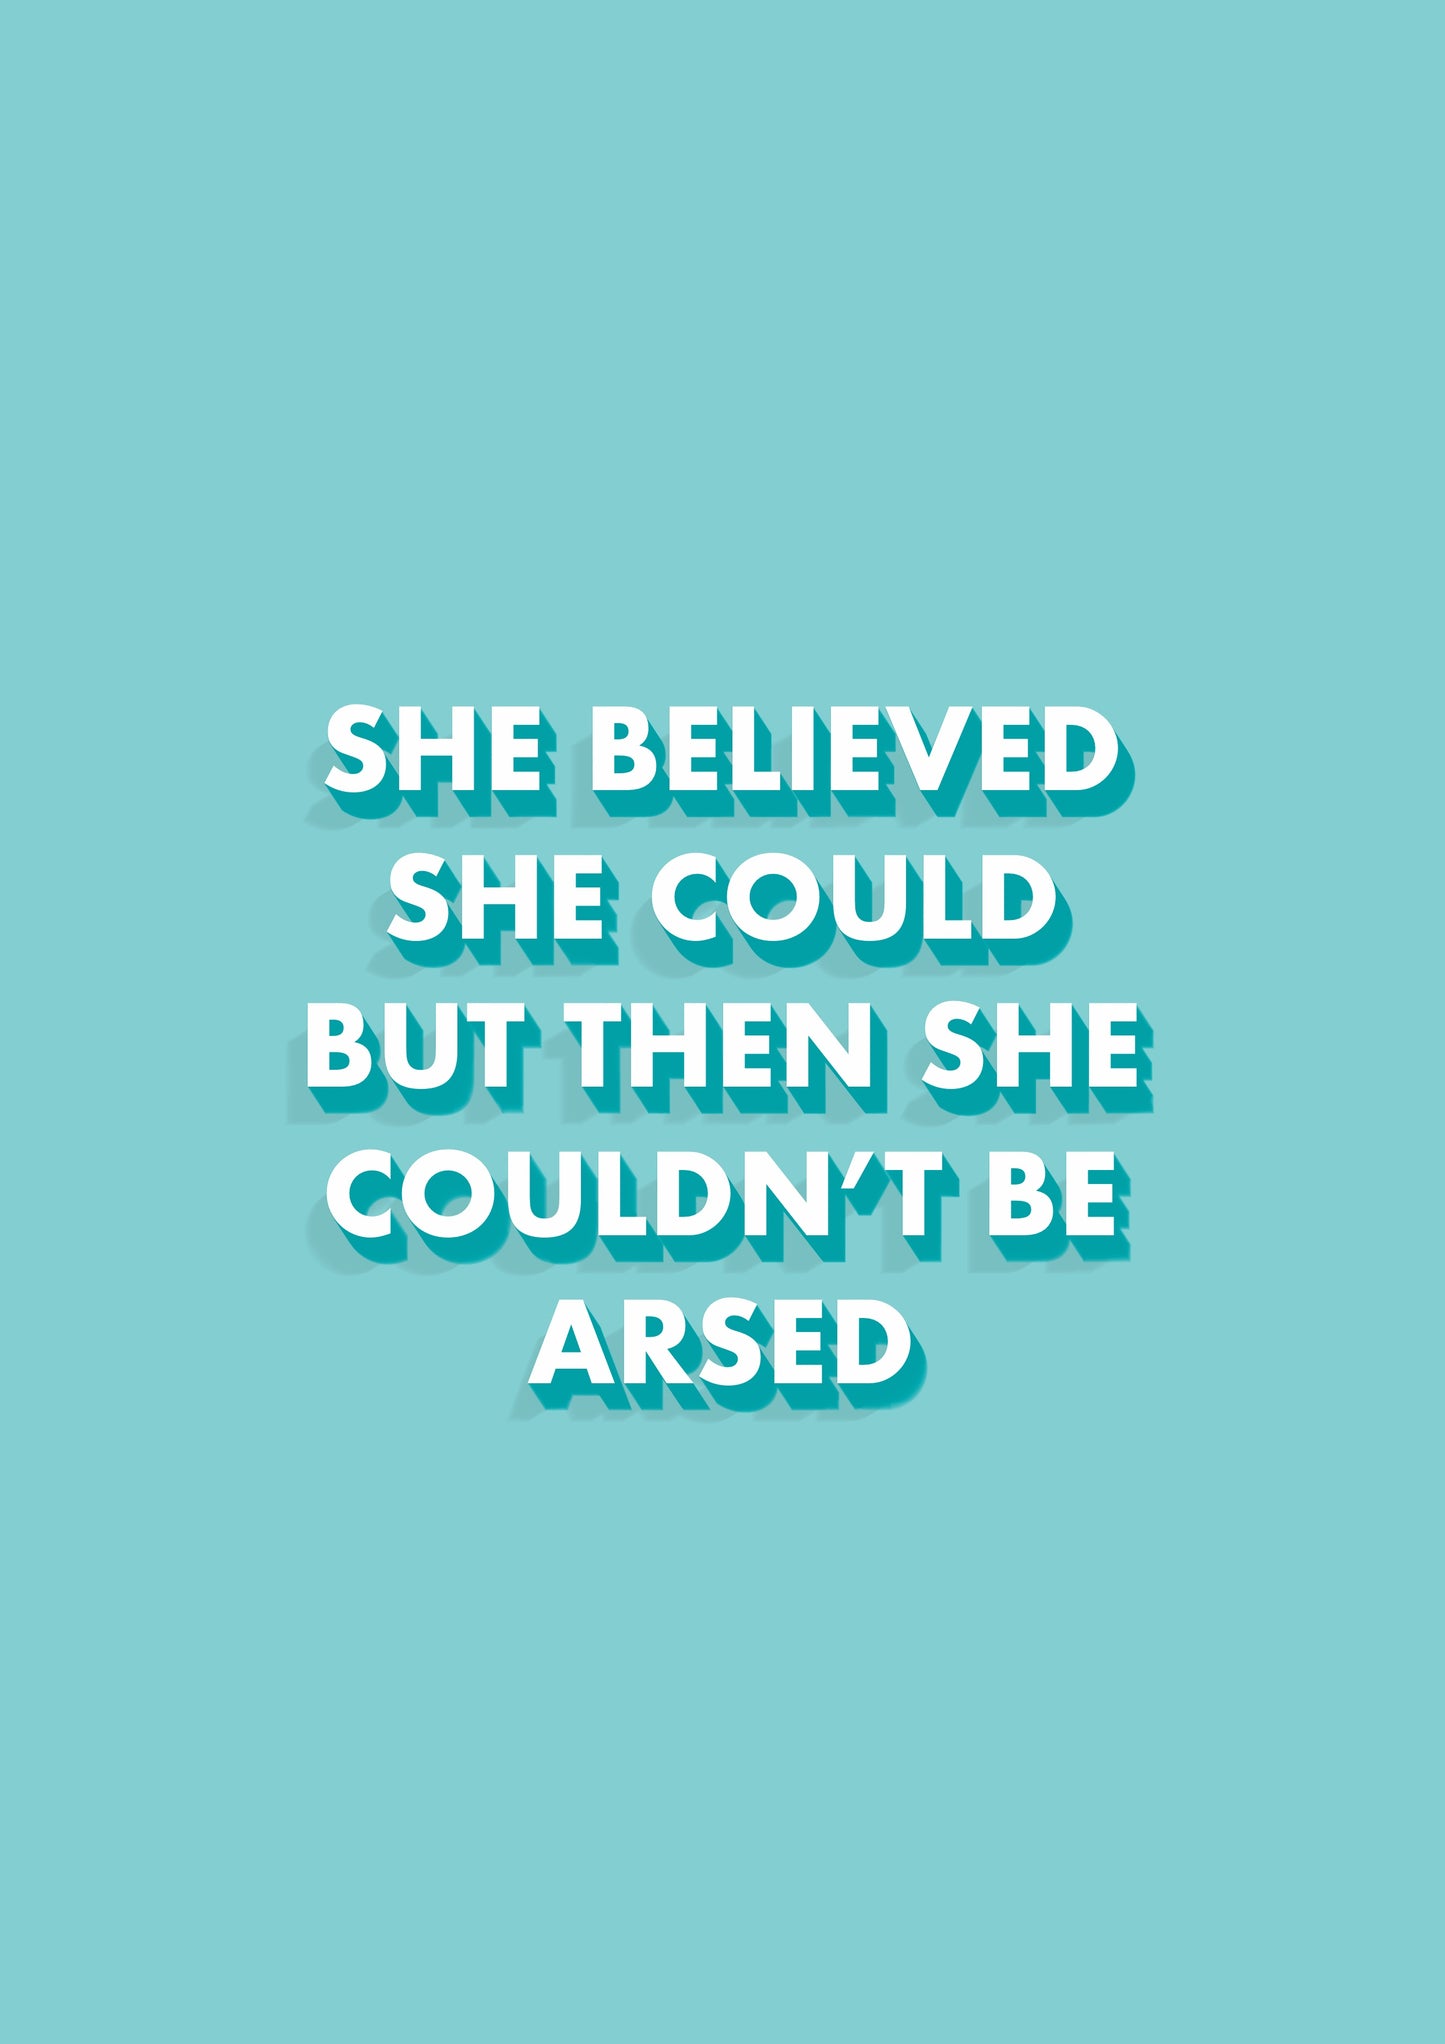 She Believed She Could But Then She Couldnt Be Arsed Funny Quote Blue Print